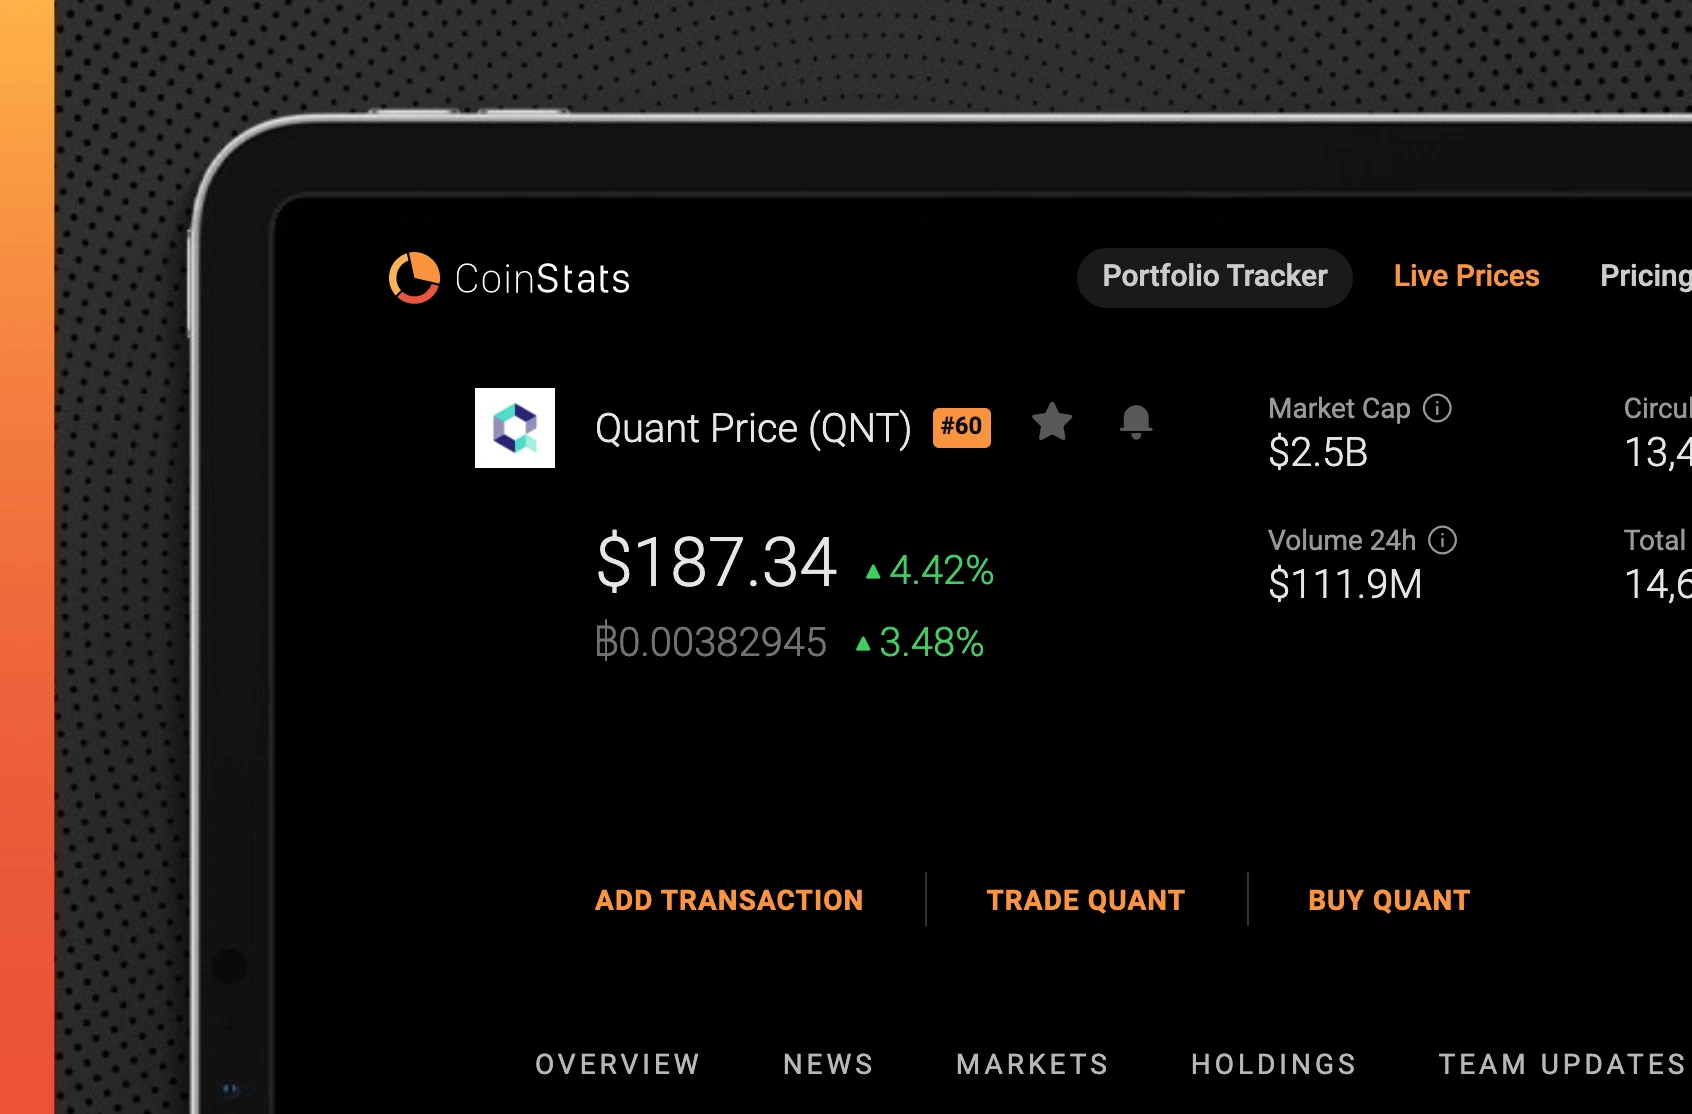 How to Buy Quant | Where, How and Why